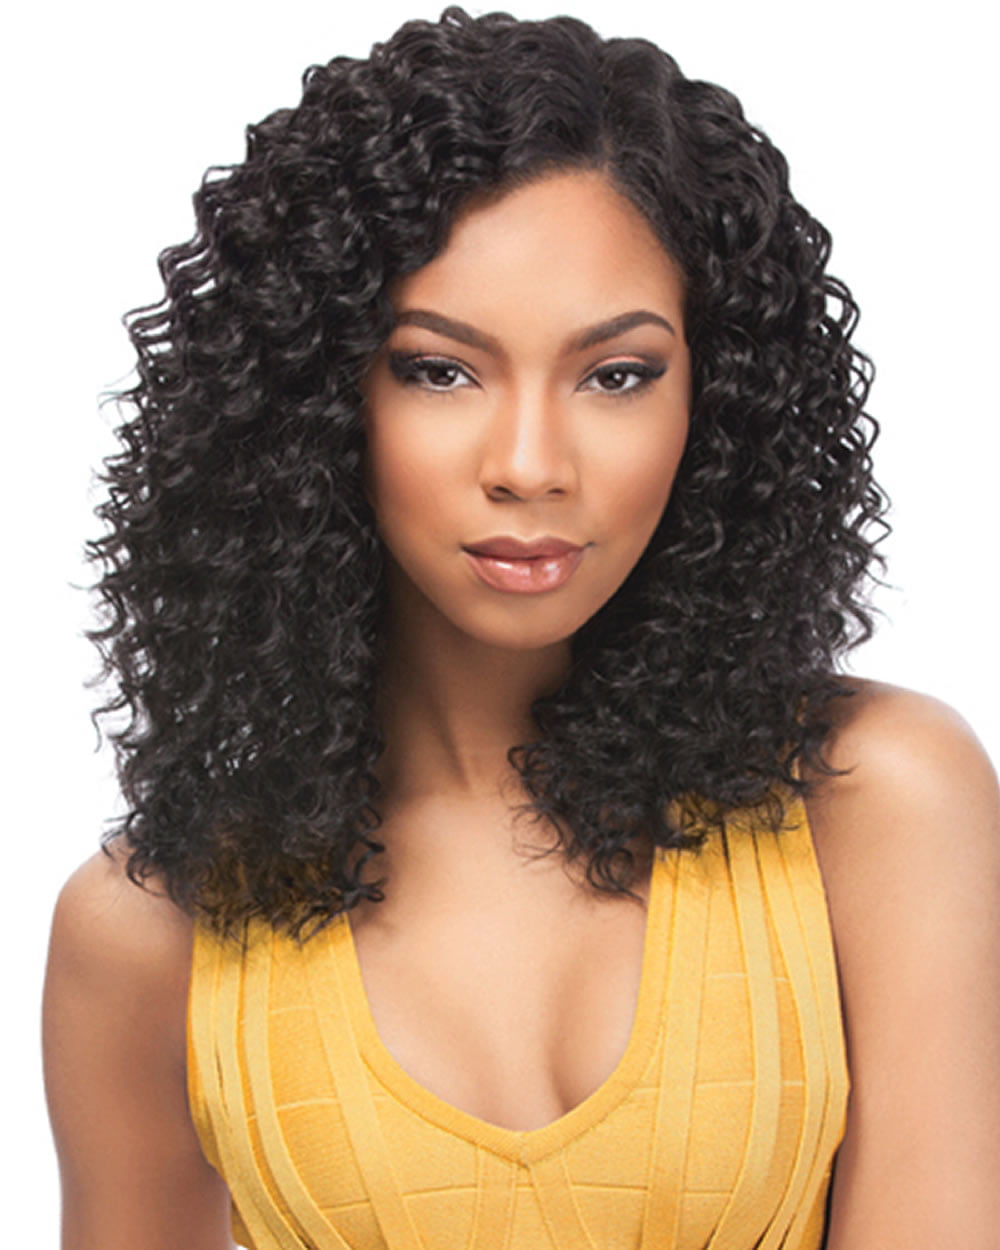 Natural Hairstyles for African American Women – HAIRSTYLES